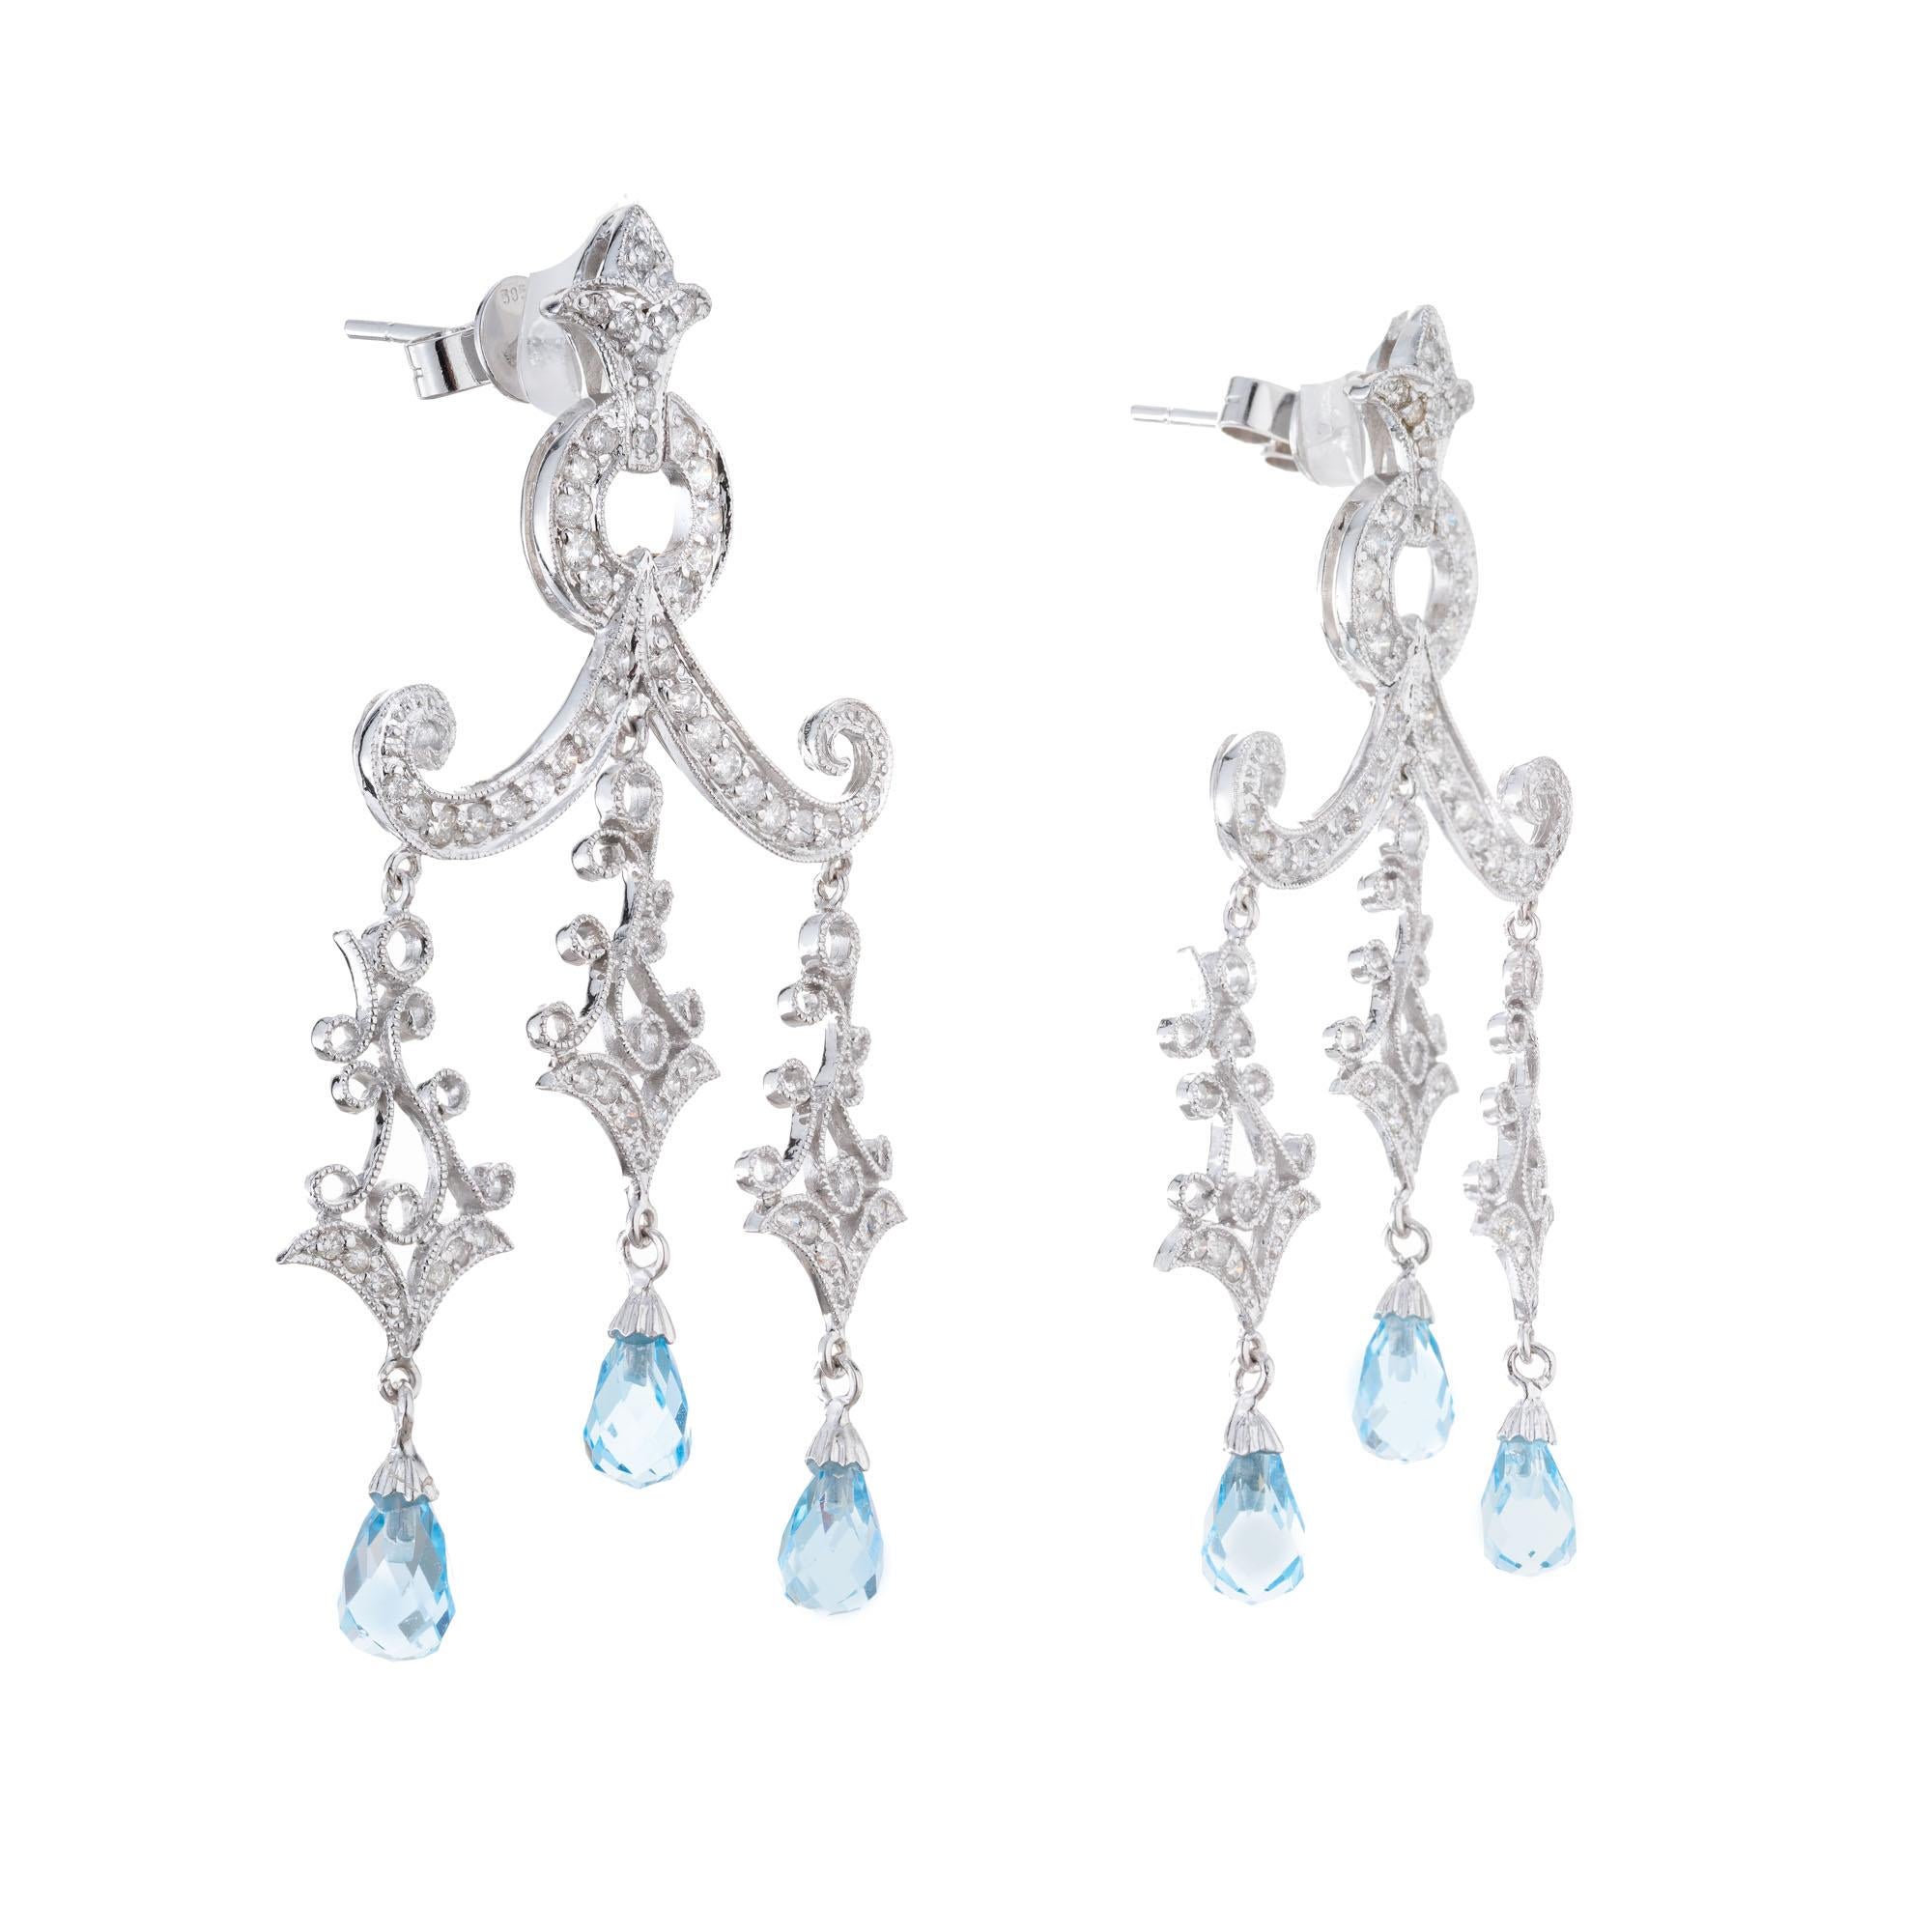 Six Briolette shaped Topaz with 112 round full cut diamonds in 14k white gold dangle chandelier style earrings. 

6 Briolette Blue Topaz approx. total weight 3.00ct
112 round full cut diamonds, approx. total weight .97cts, SI1
14k white